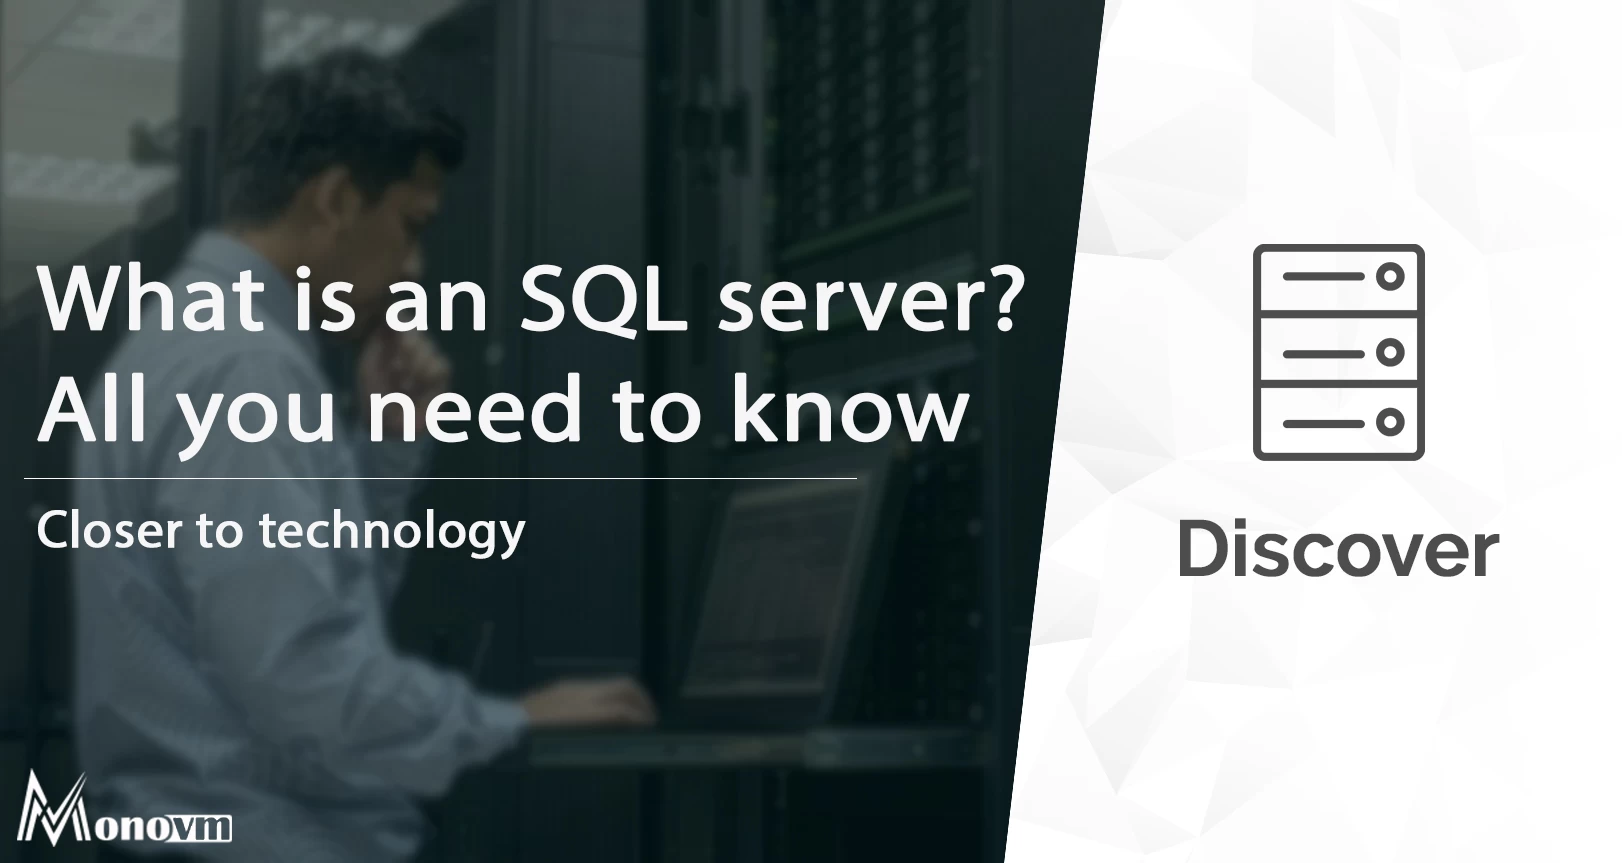 What is SQL server? All you need to know!